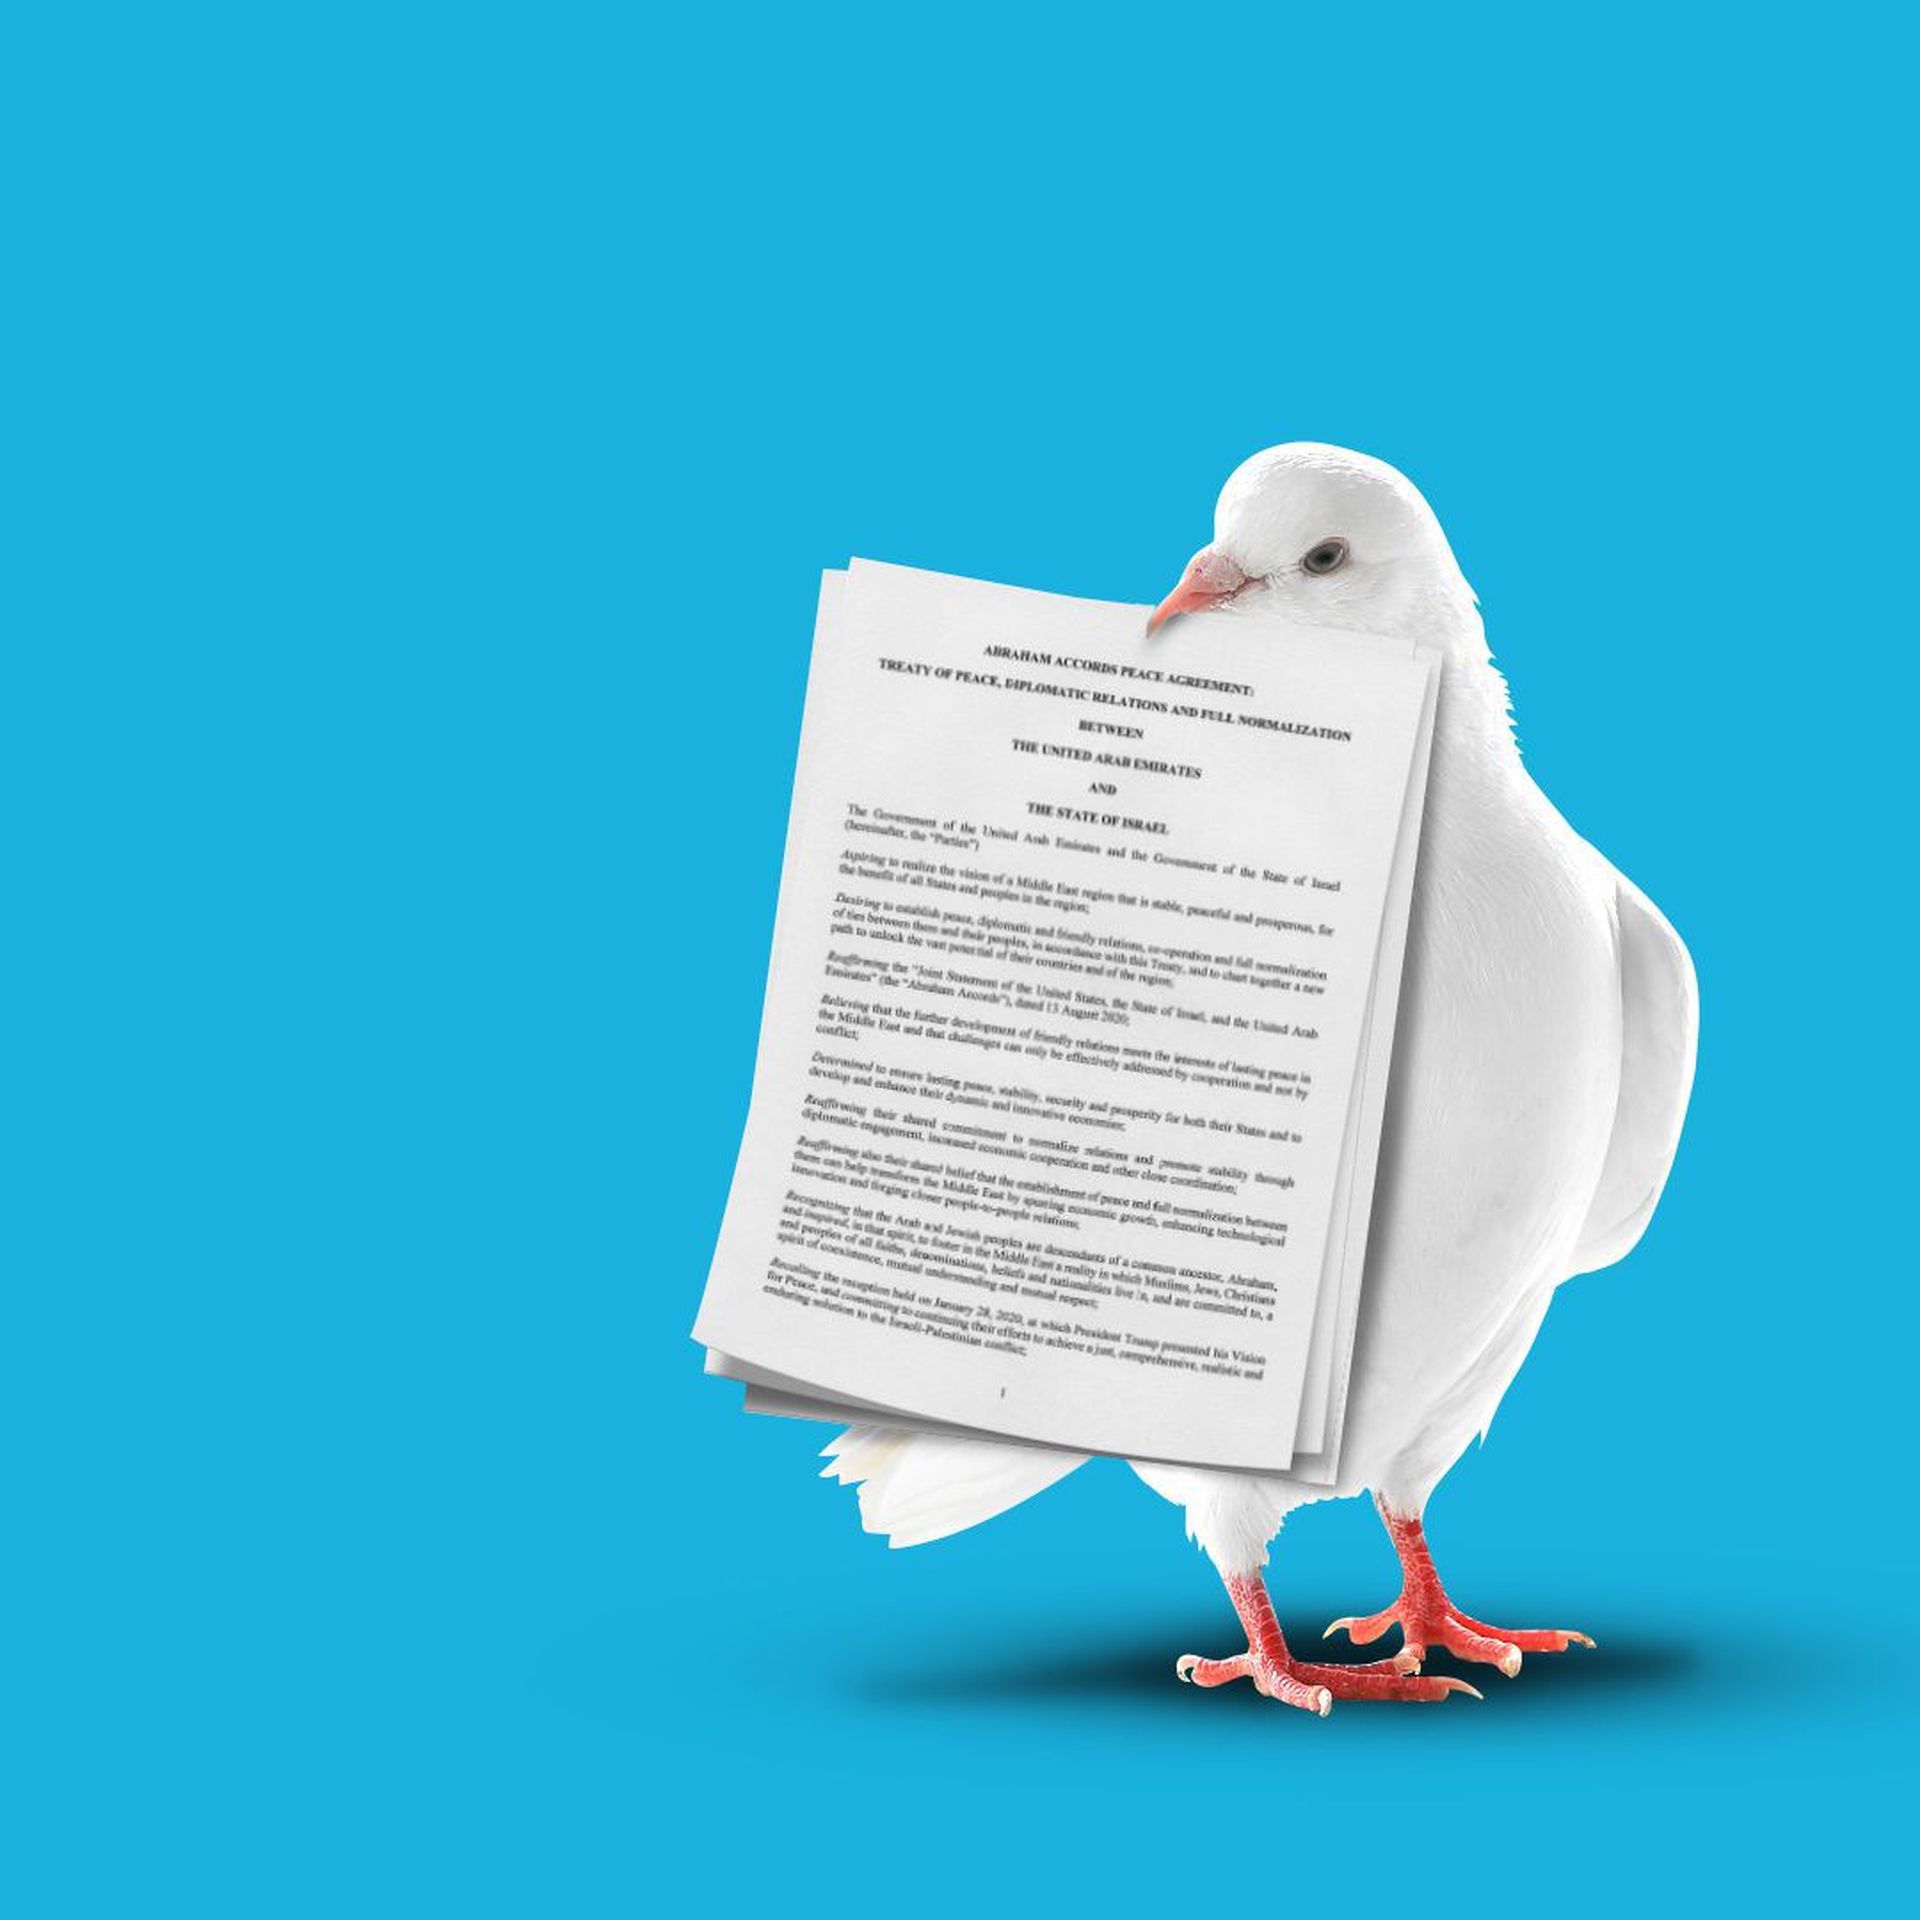 Editorial illustration of a bird holding a paper